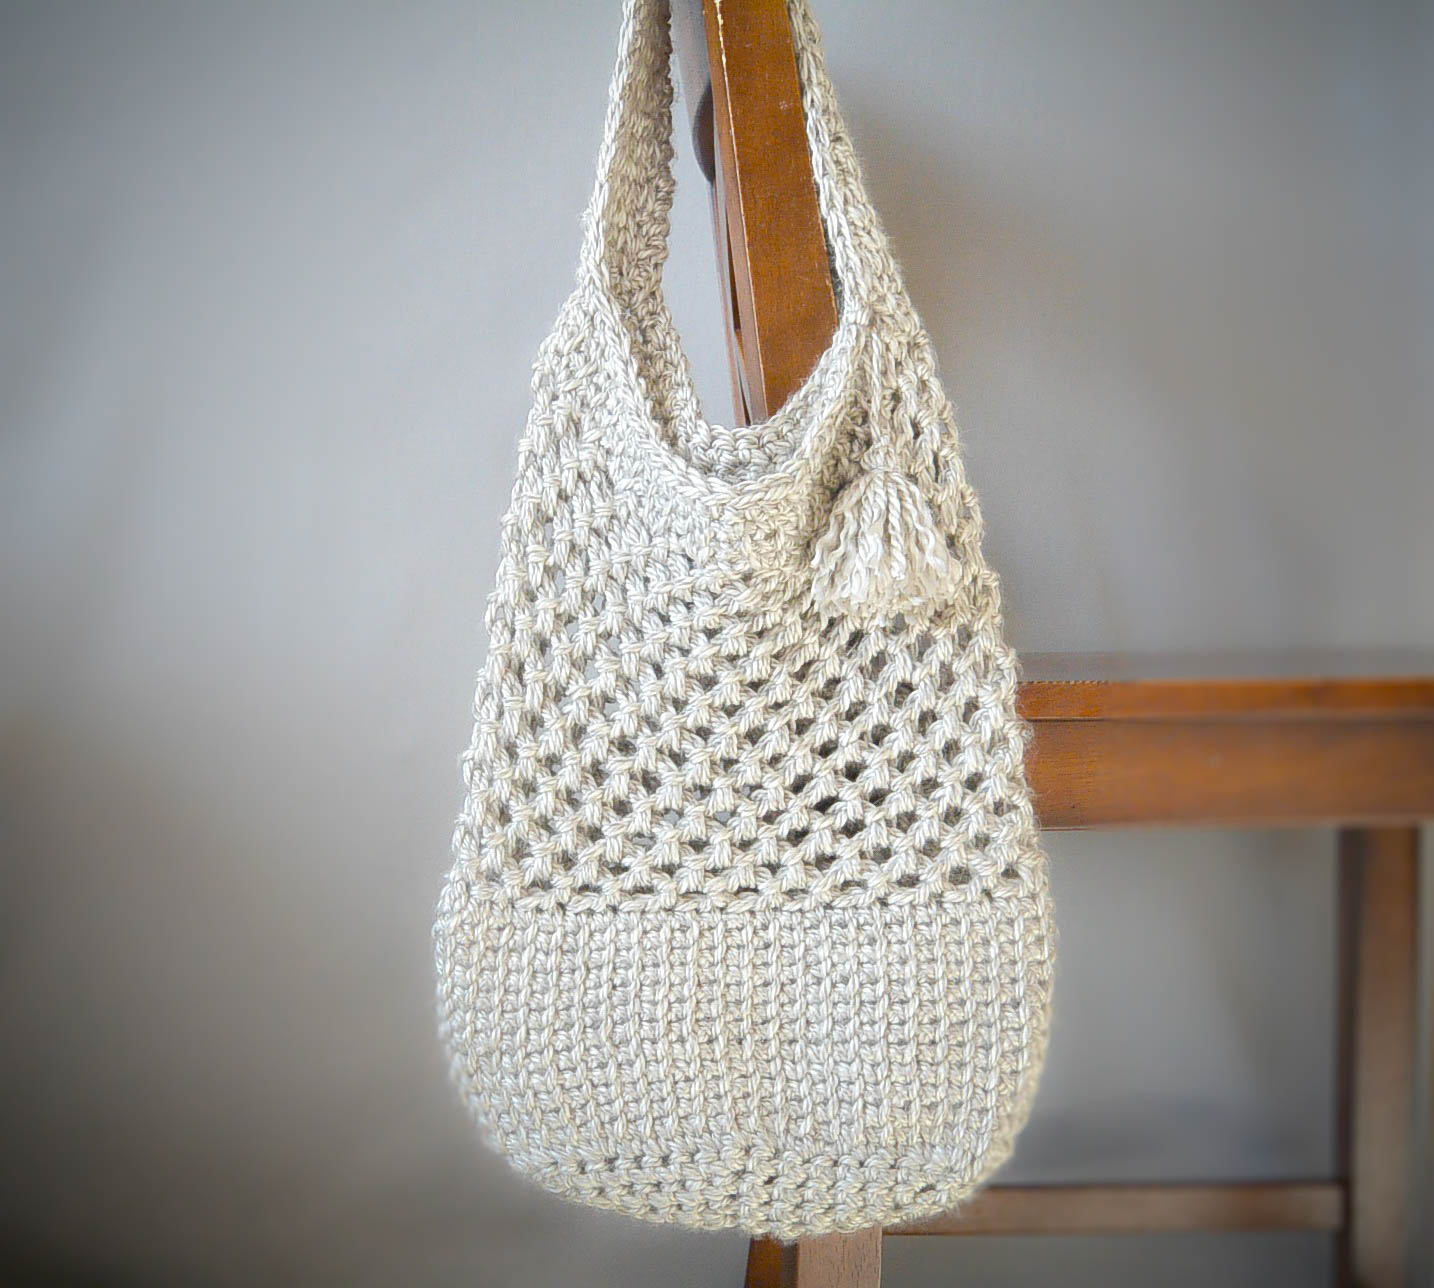 Ravelry: Tapestry Crochet Tote Bag pattern by Susan Lowman